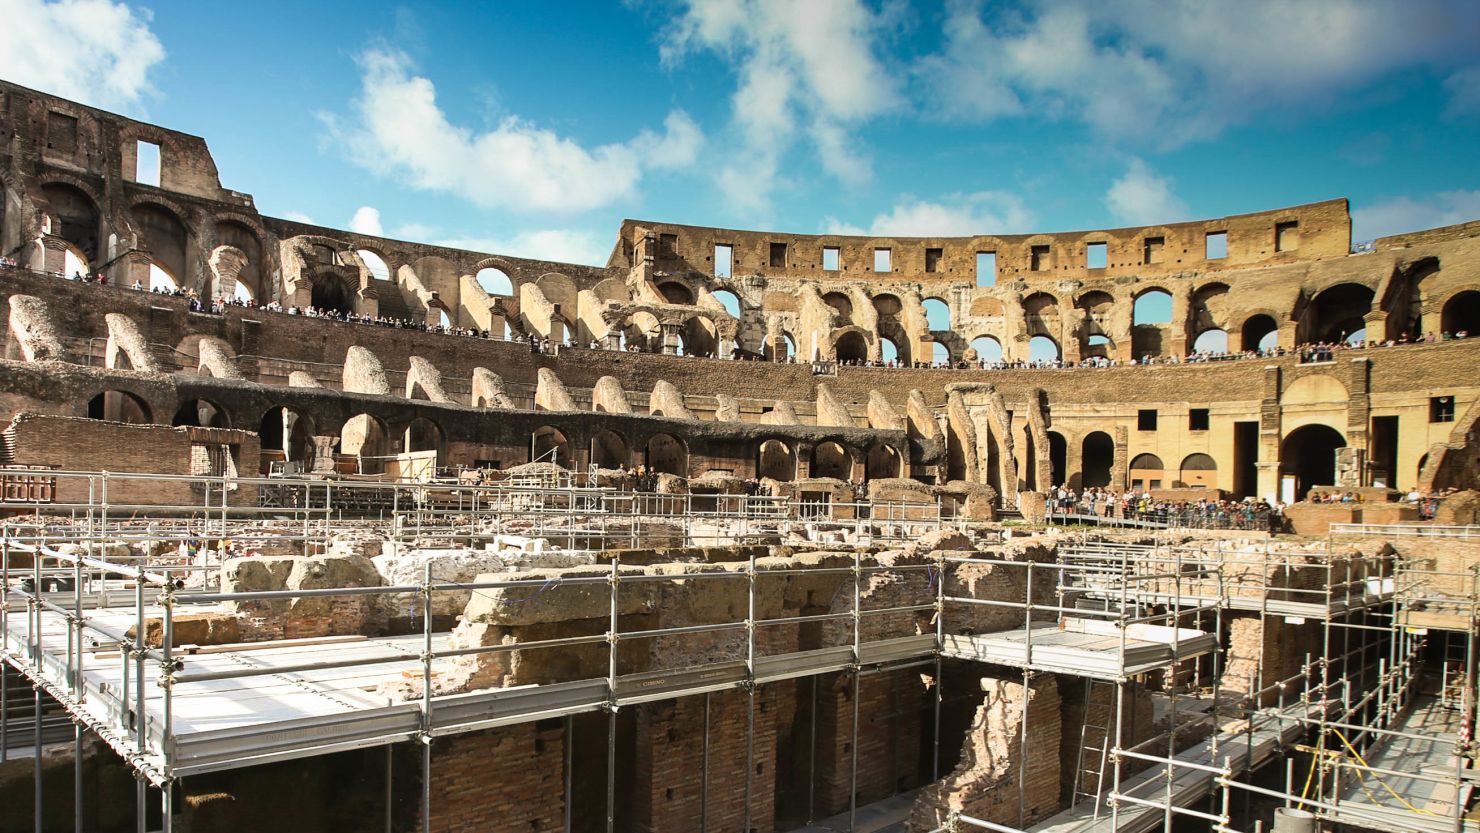 The Colosseum has opened its underground level for the first time in its history.